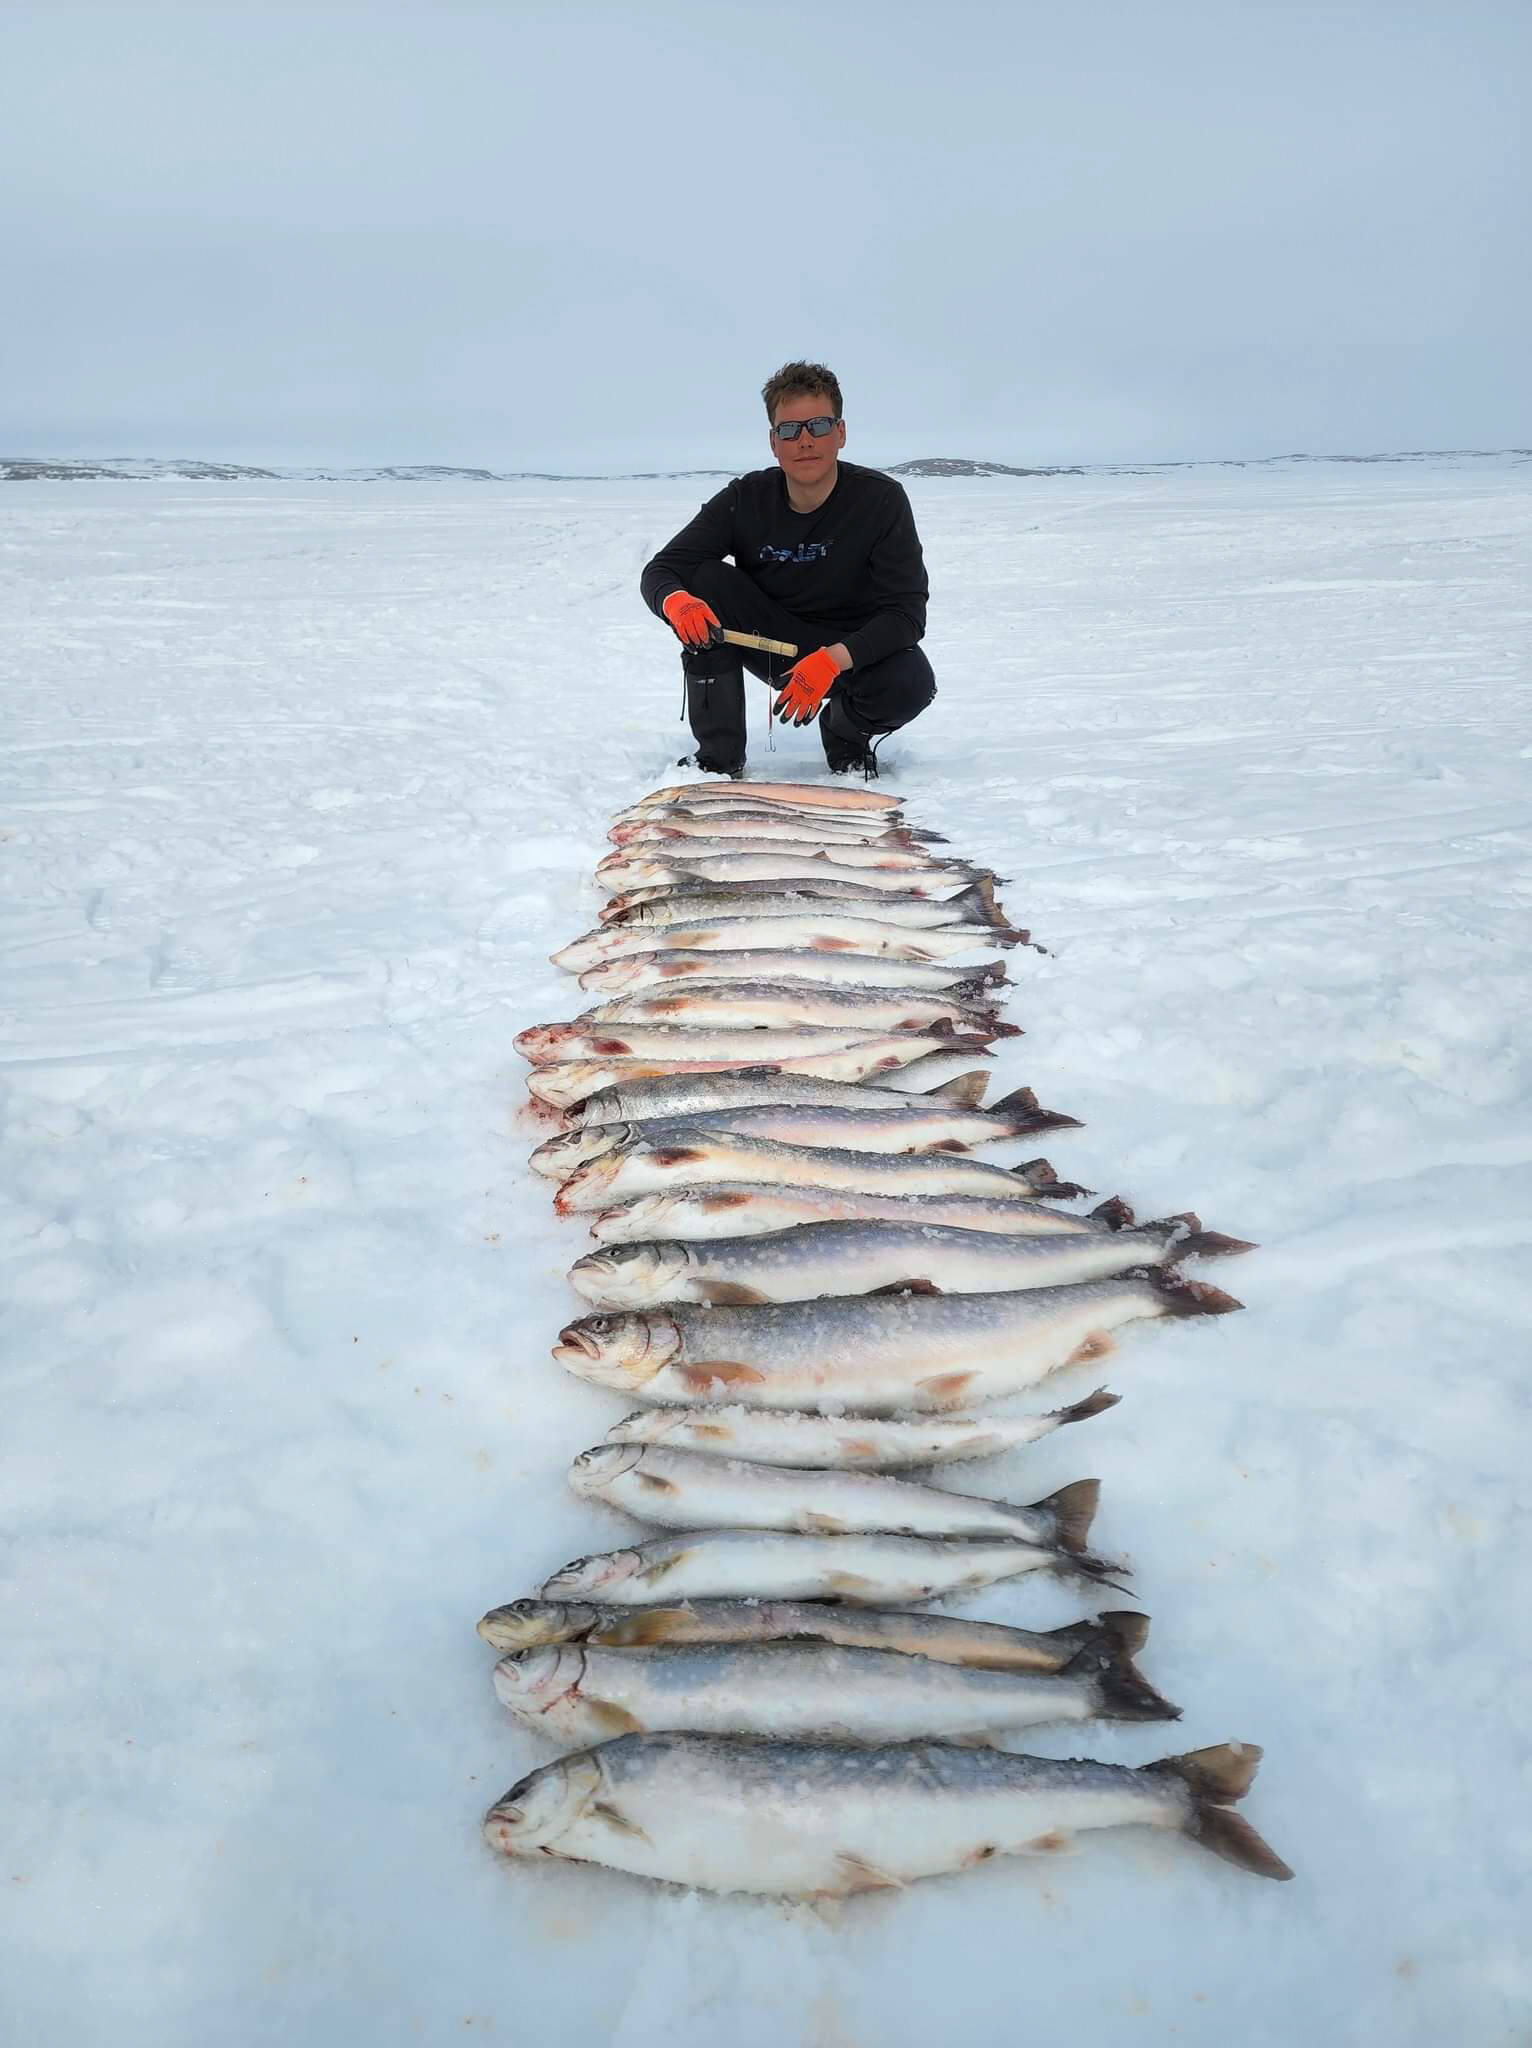 30329831_web1_220912-nun-The-ups-and-downs-of-hunting-in-Nunavut-Olafchristensenfishharvest_1